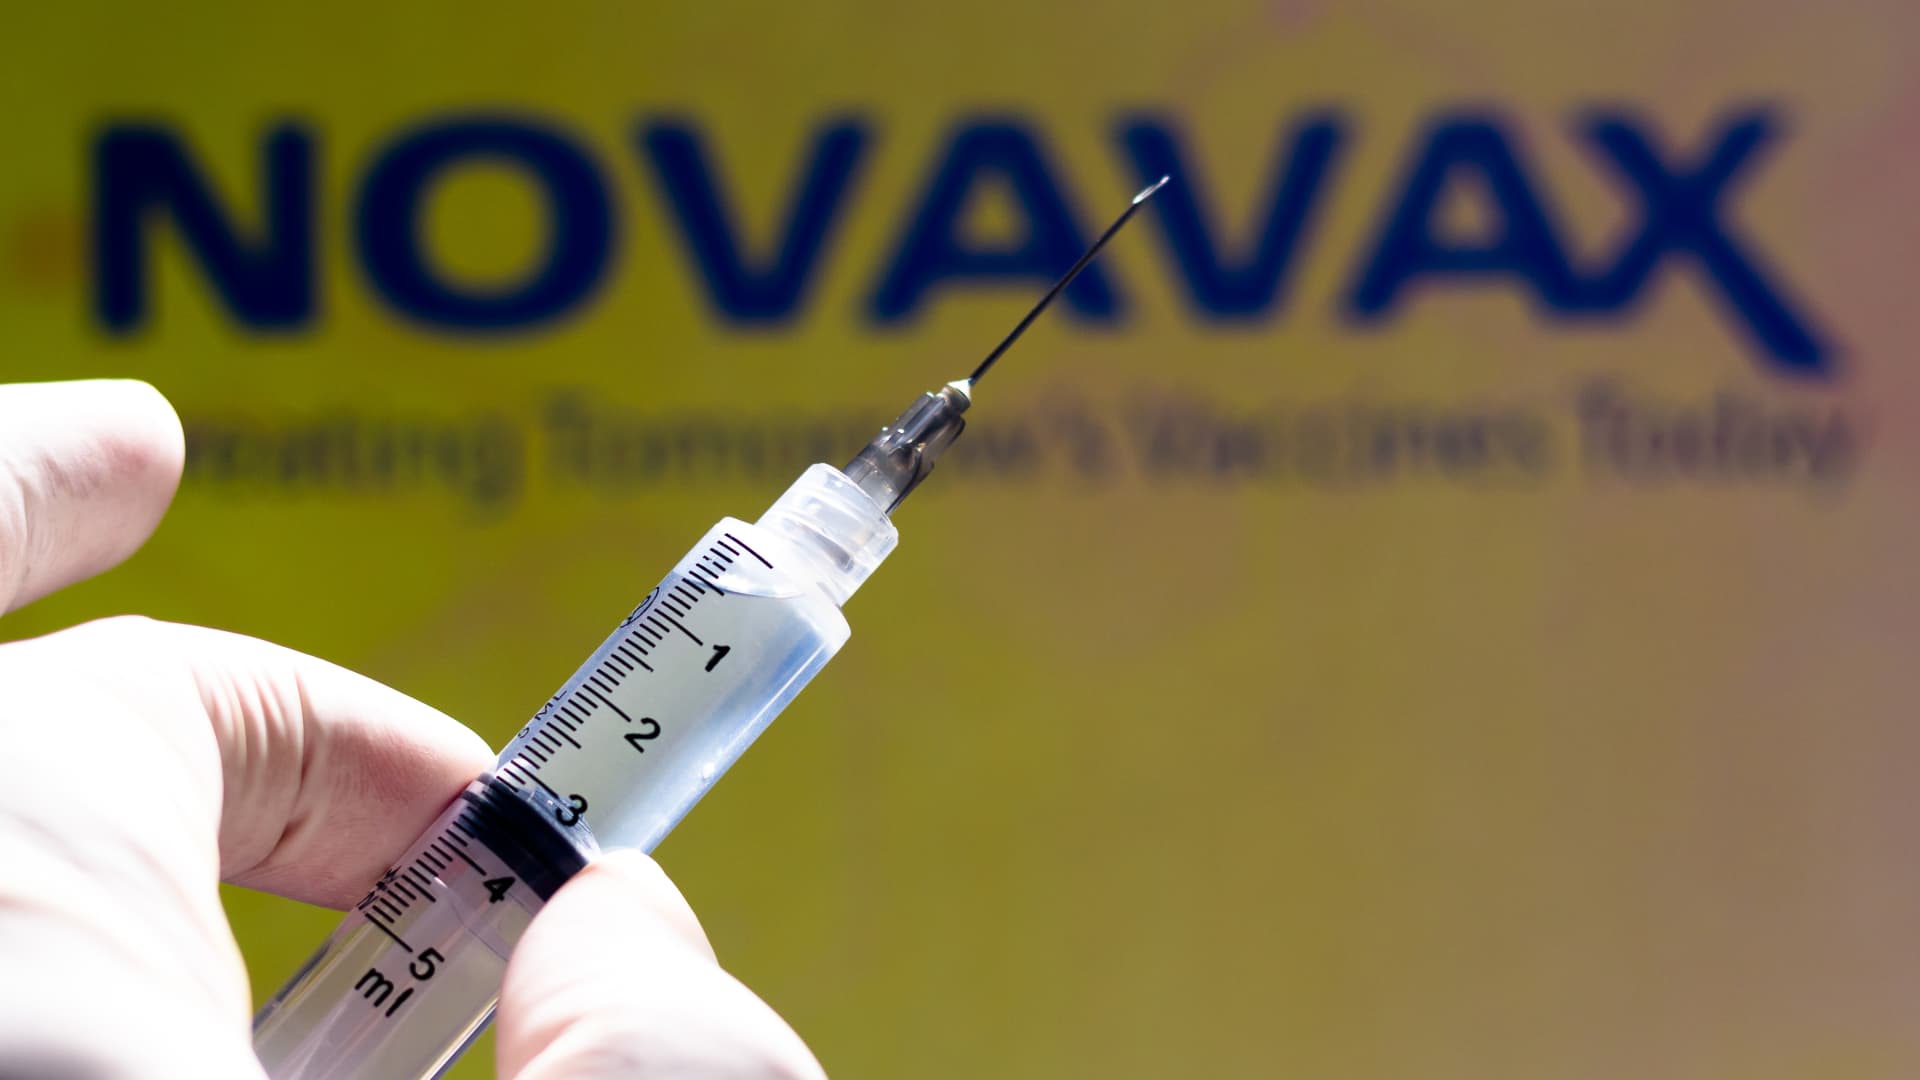 CDC clears Novavax Covid-19 vaccine for adults, says shots will be available in the coming weeks